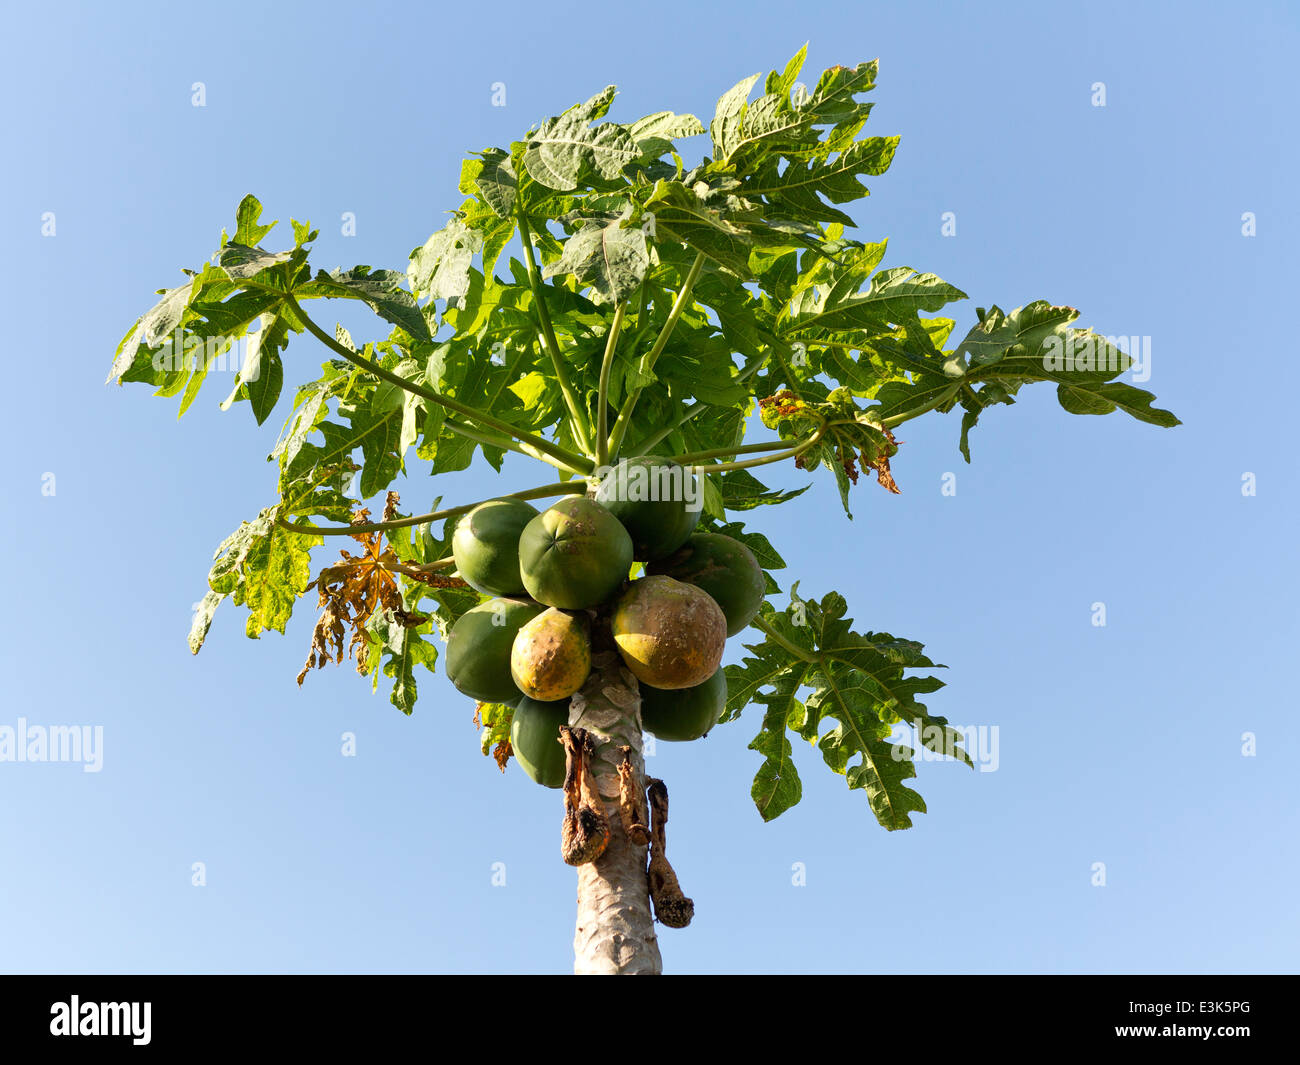 The top section of a papaya tree against a blue sky showing leaves and fruit some fruit with rot and blemishes Stock Photo